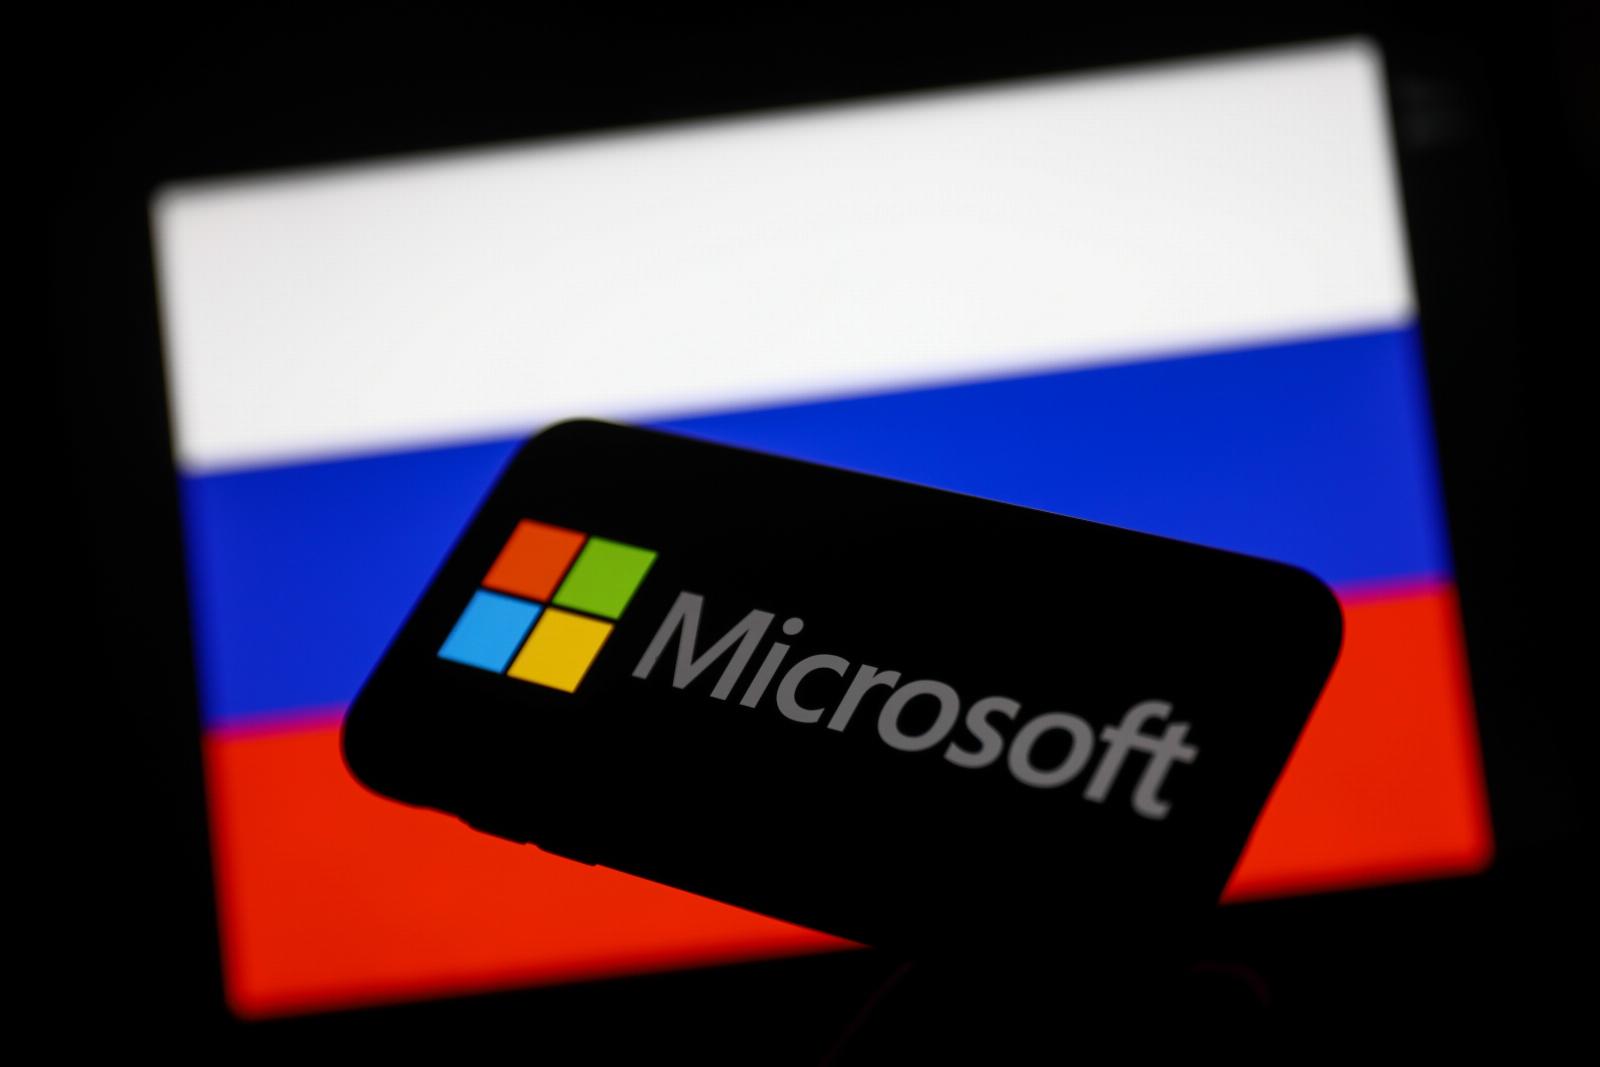 Russian spies keep hacking into Microsoft in ‘ongoing attack,’ company says